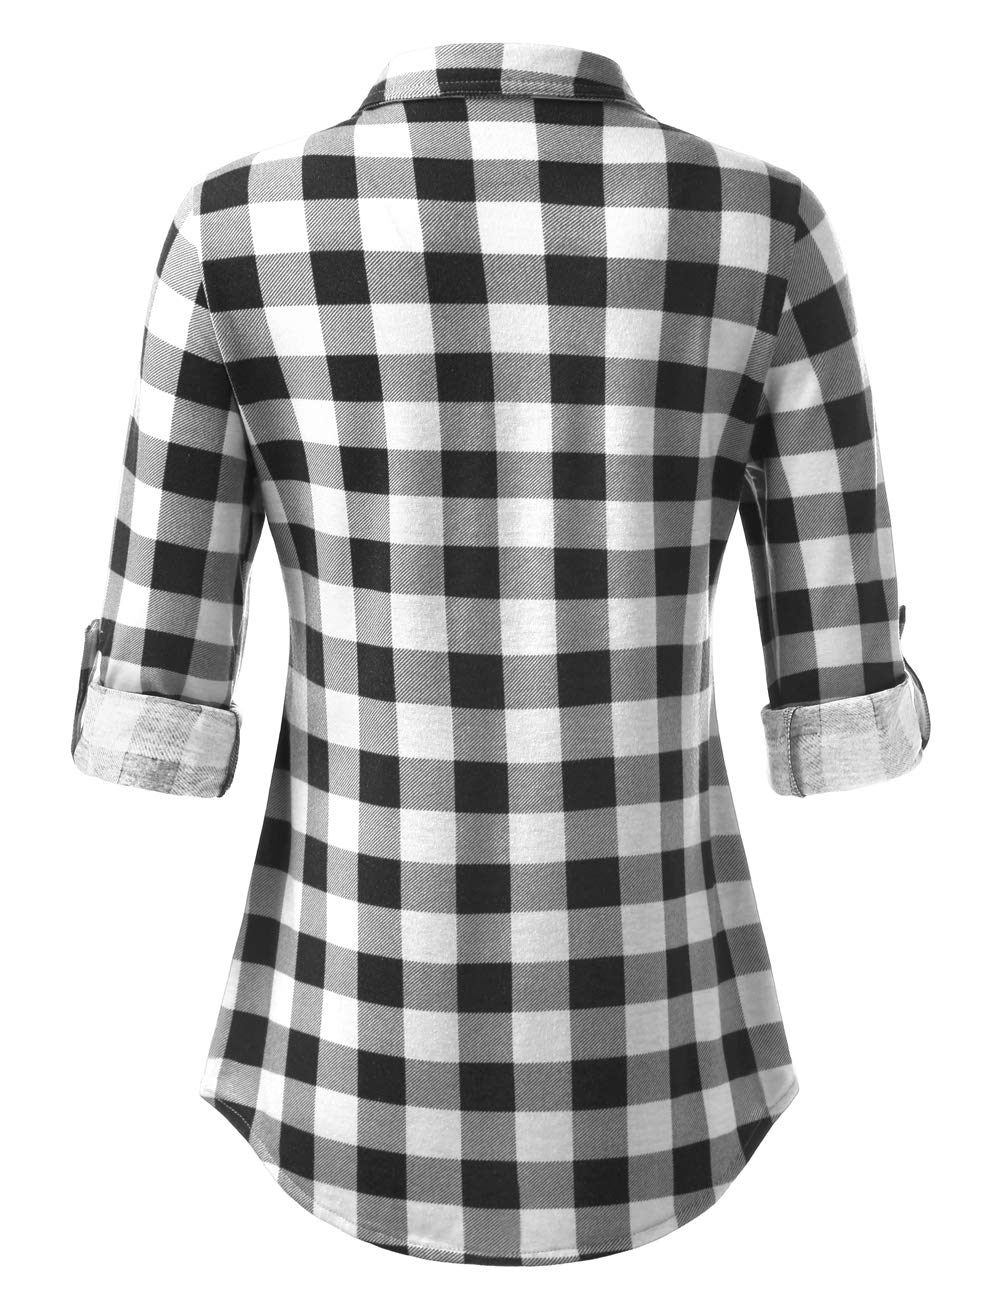 DJT Roll Up Long Sleeve Black white Women’s Collared Button Down Plaid Shirt